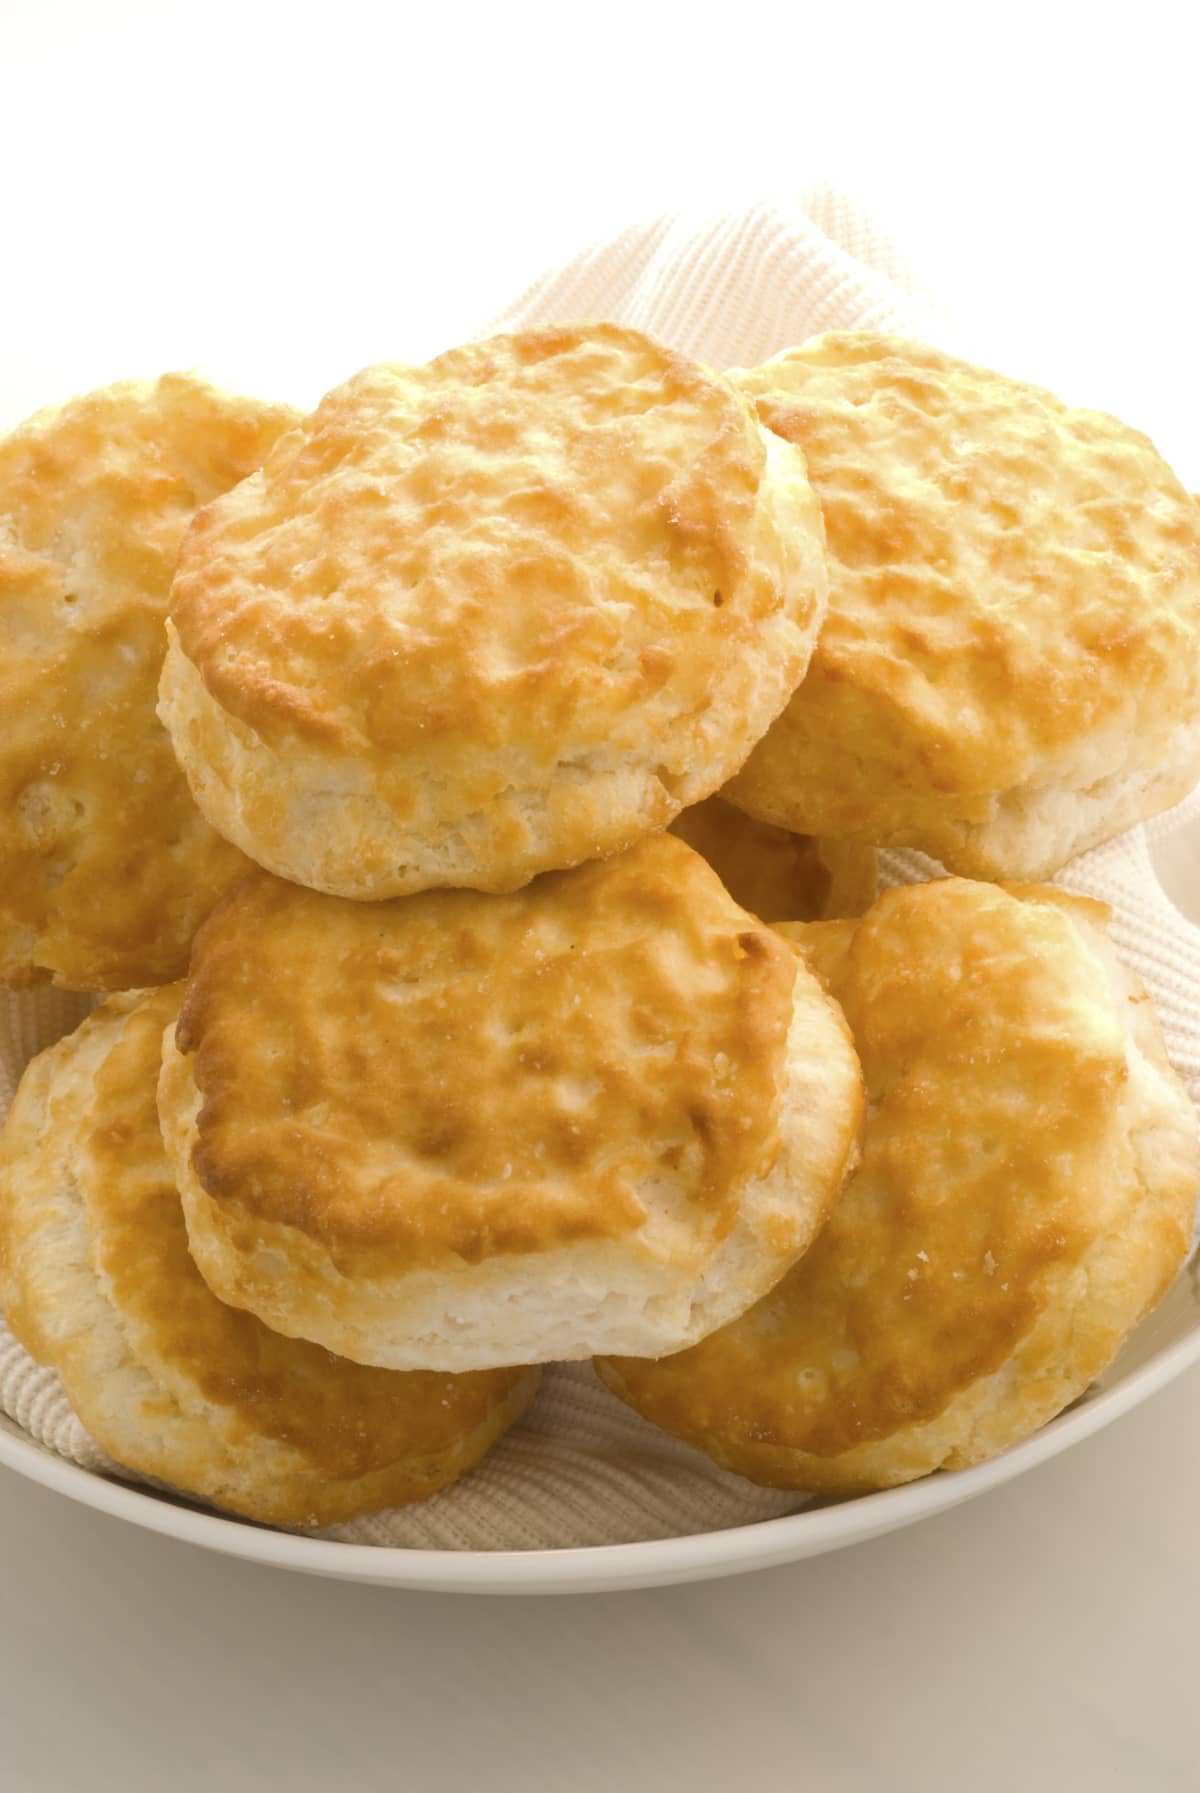 Cooked biscuits piled on a plate